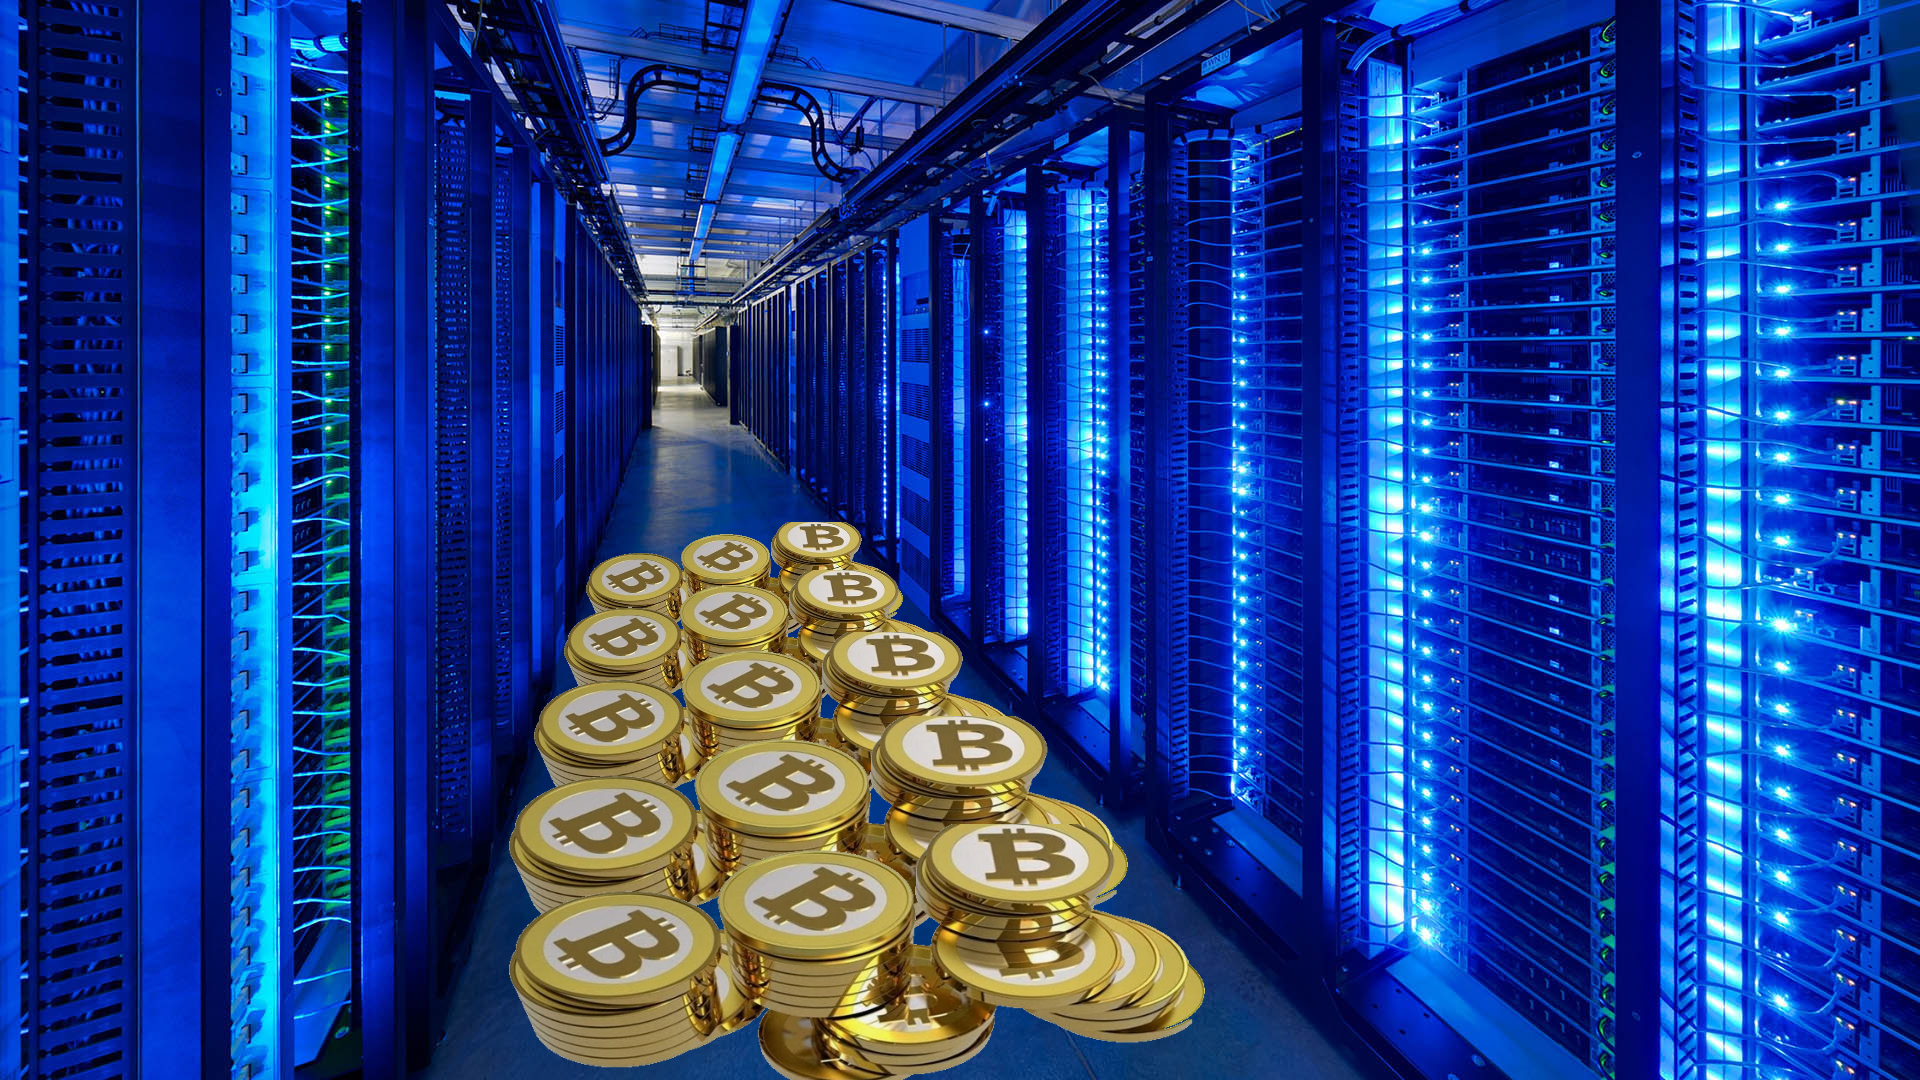 sacred headwaters mining bitcoins